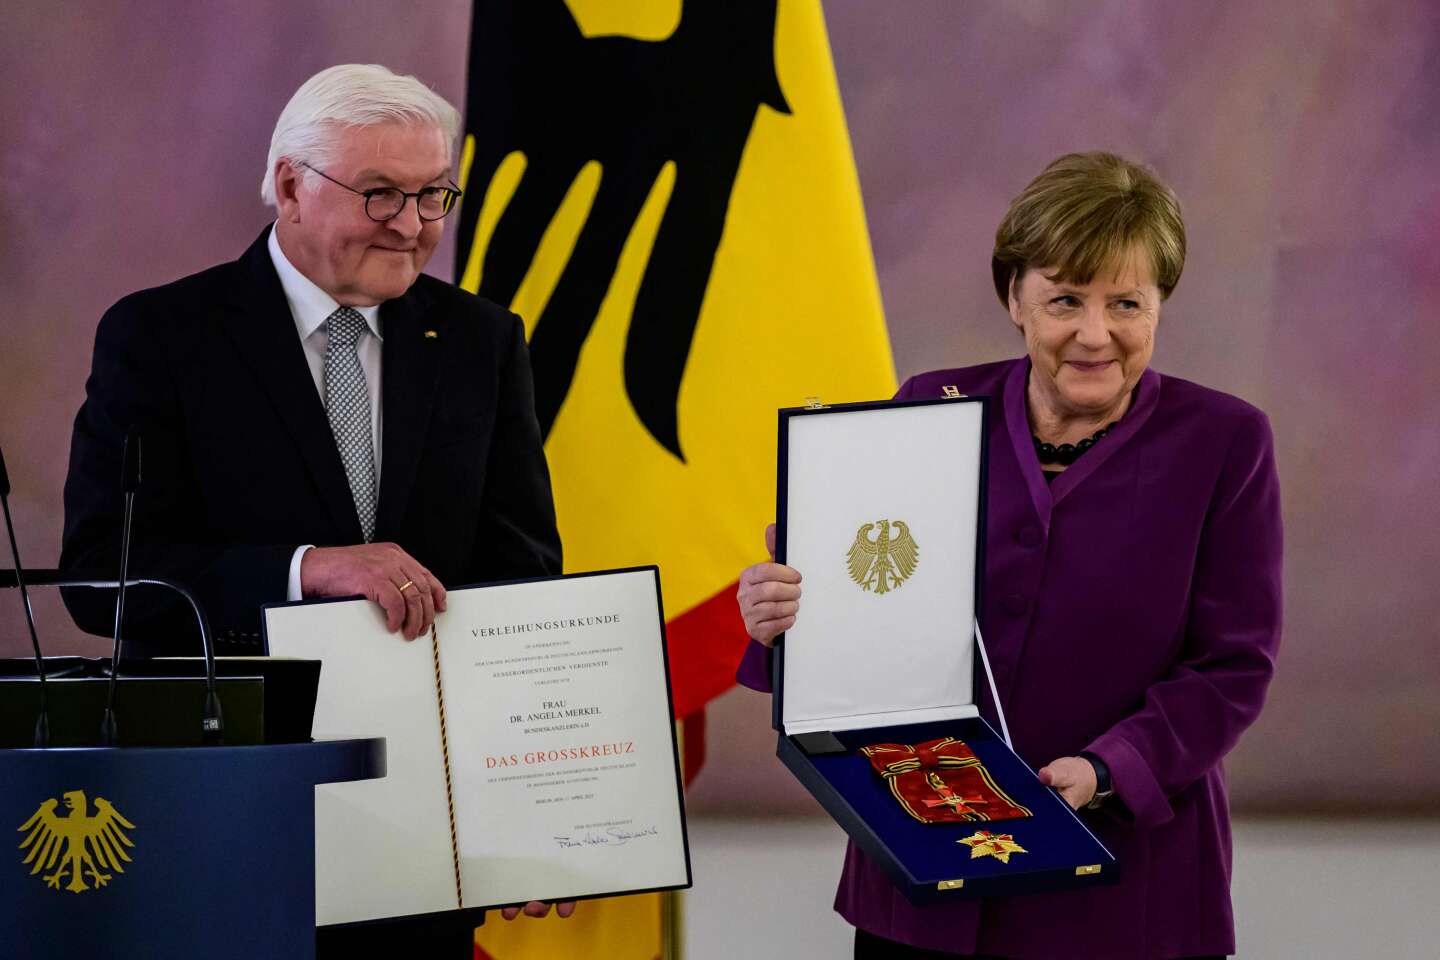 In Germany, the honor given to Angela Merkel has been criticized within the CDU